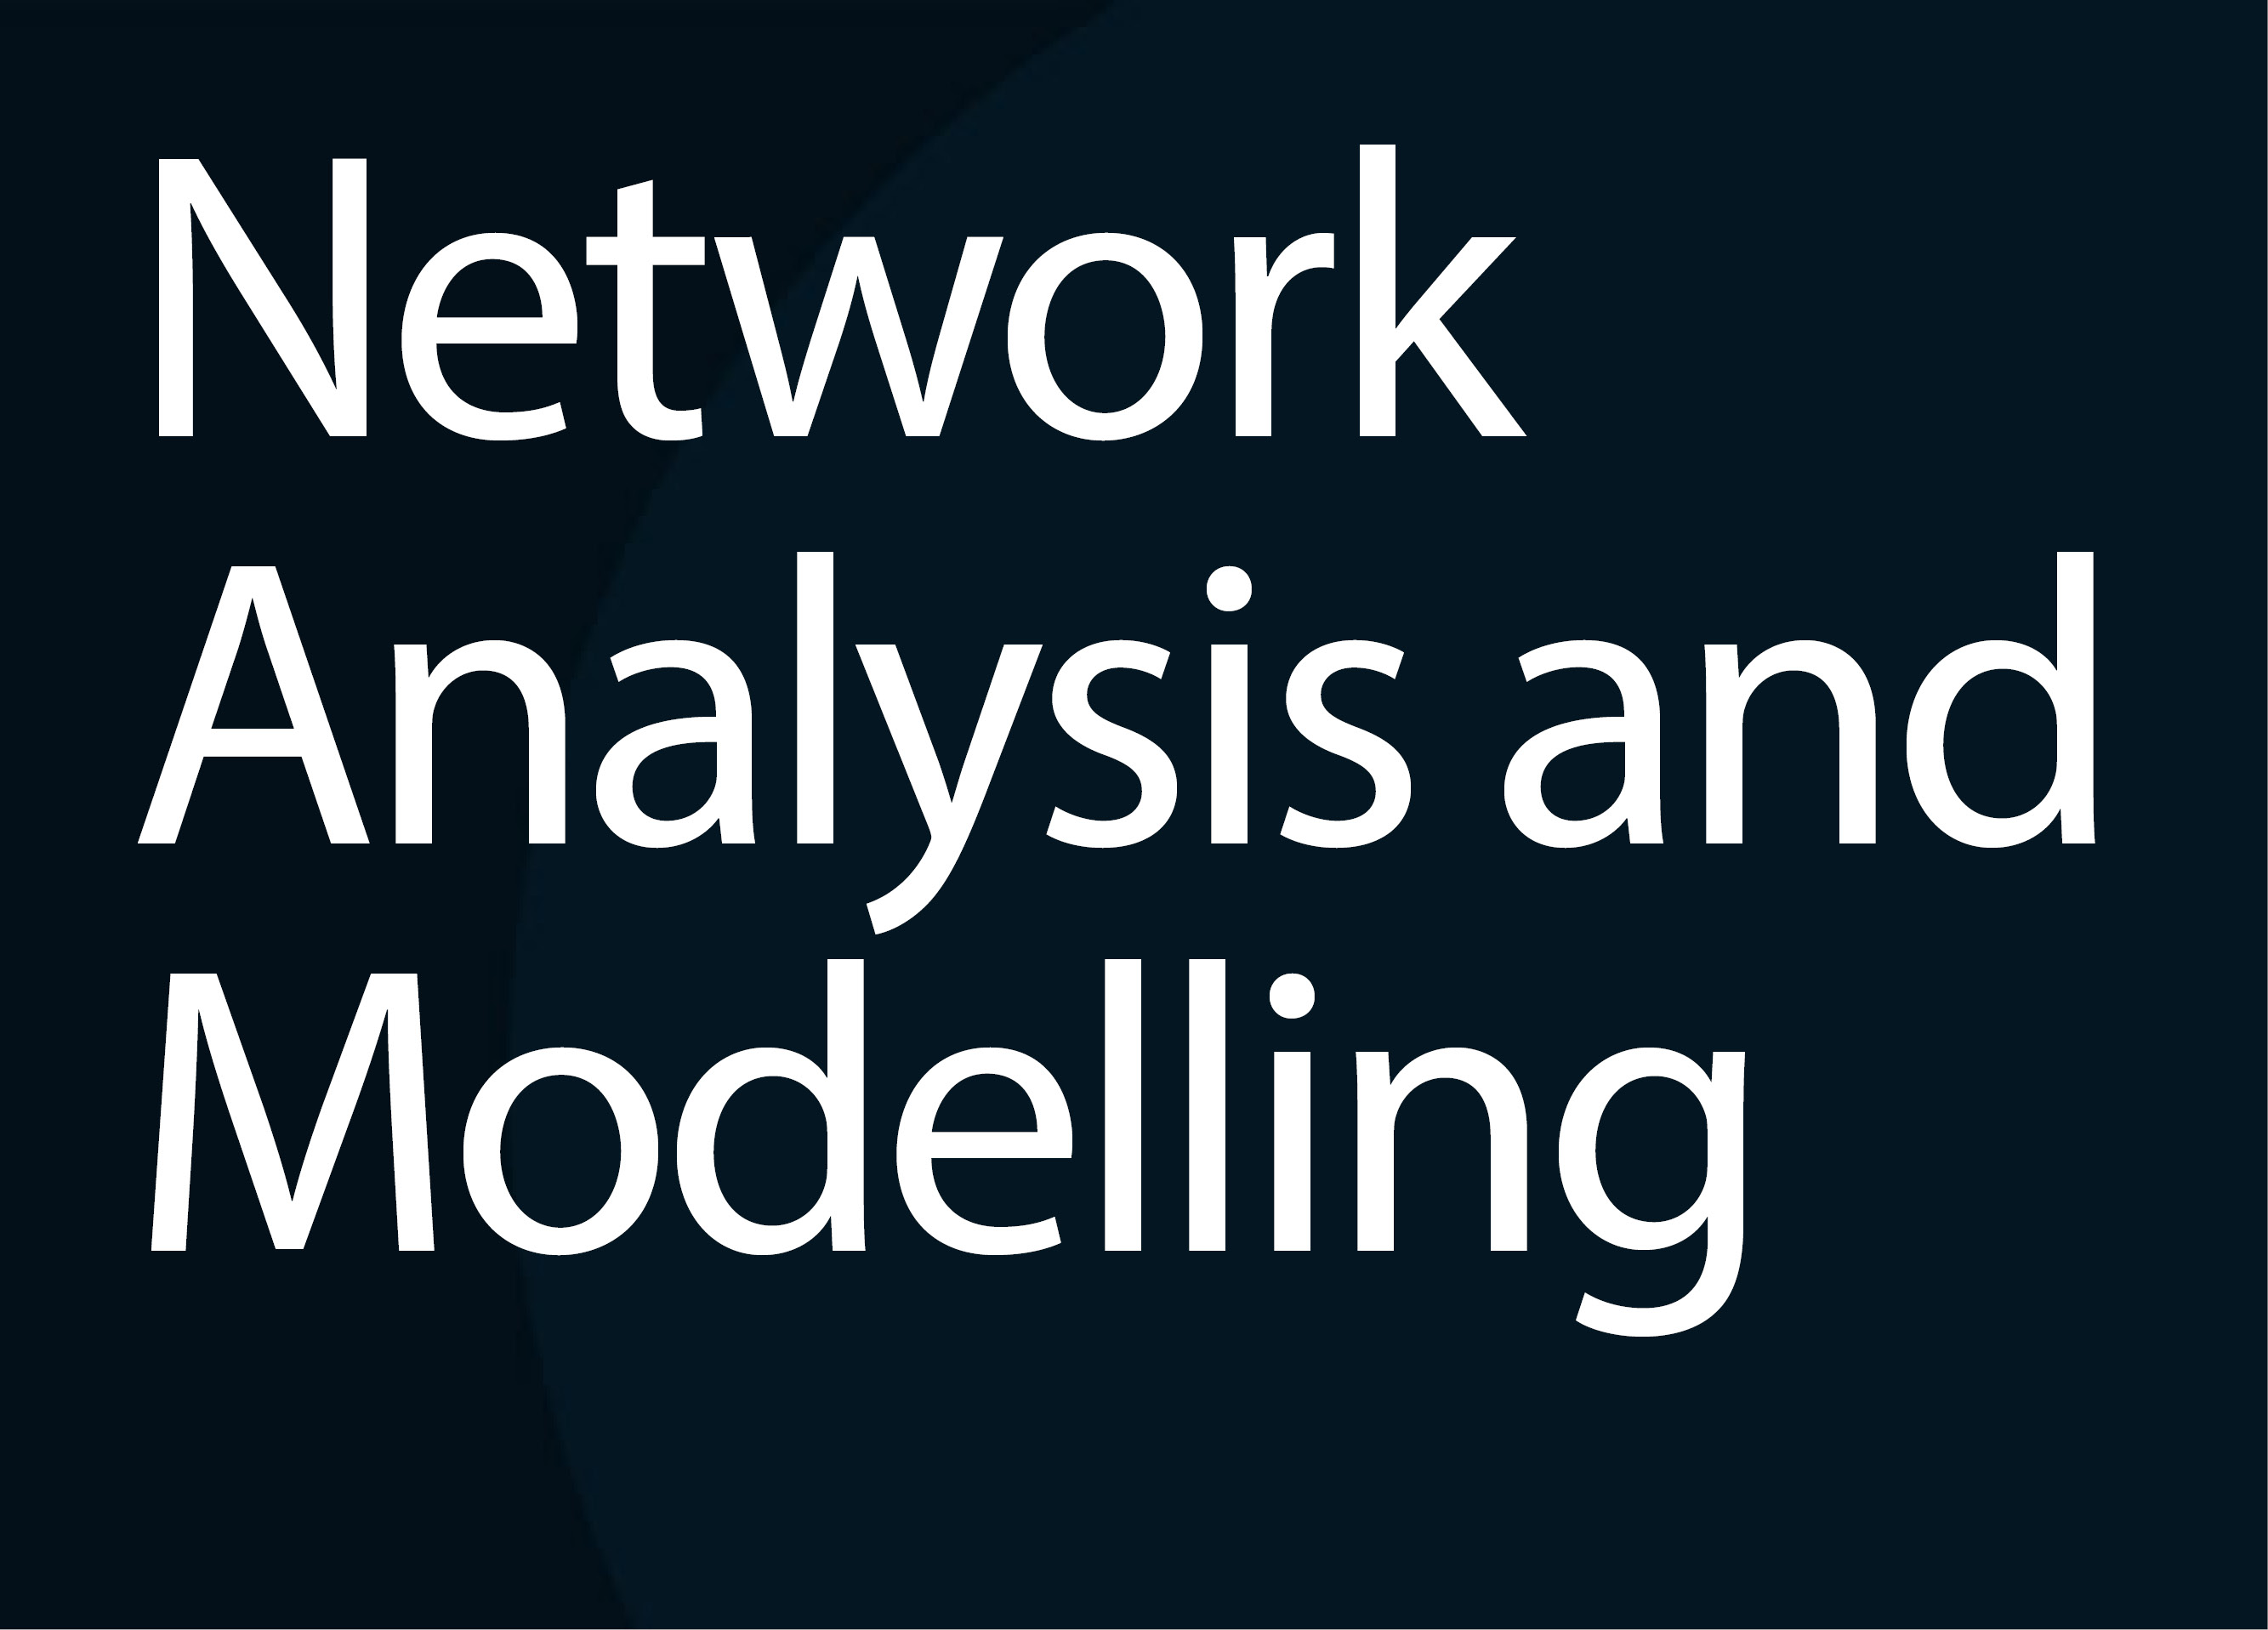 Special issue: Network Analysis and Modelling